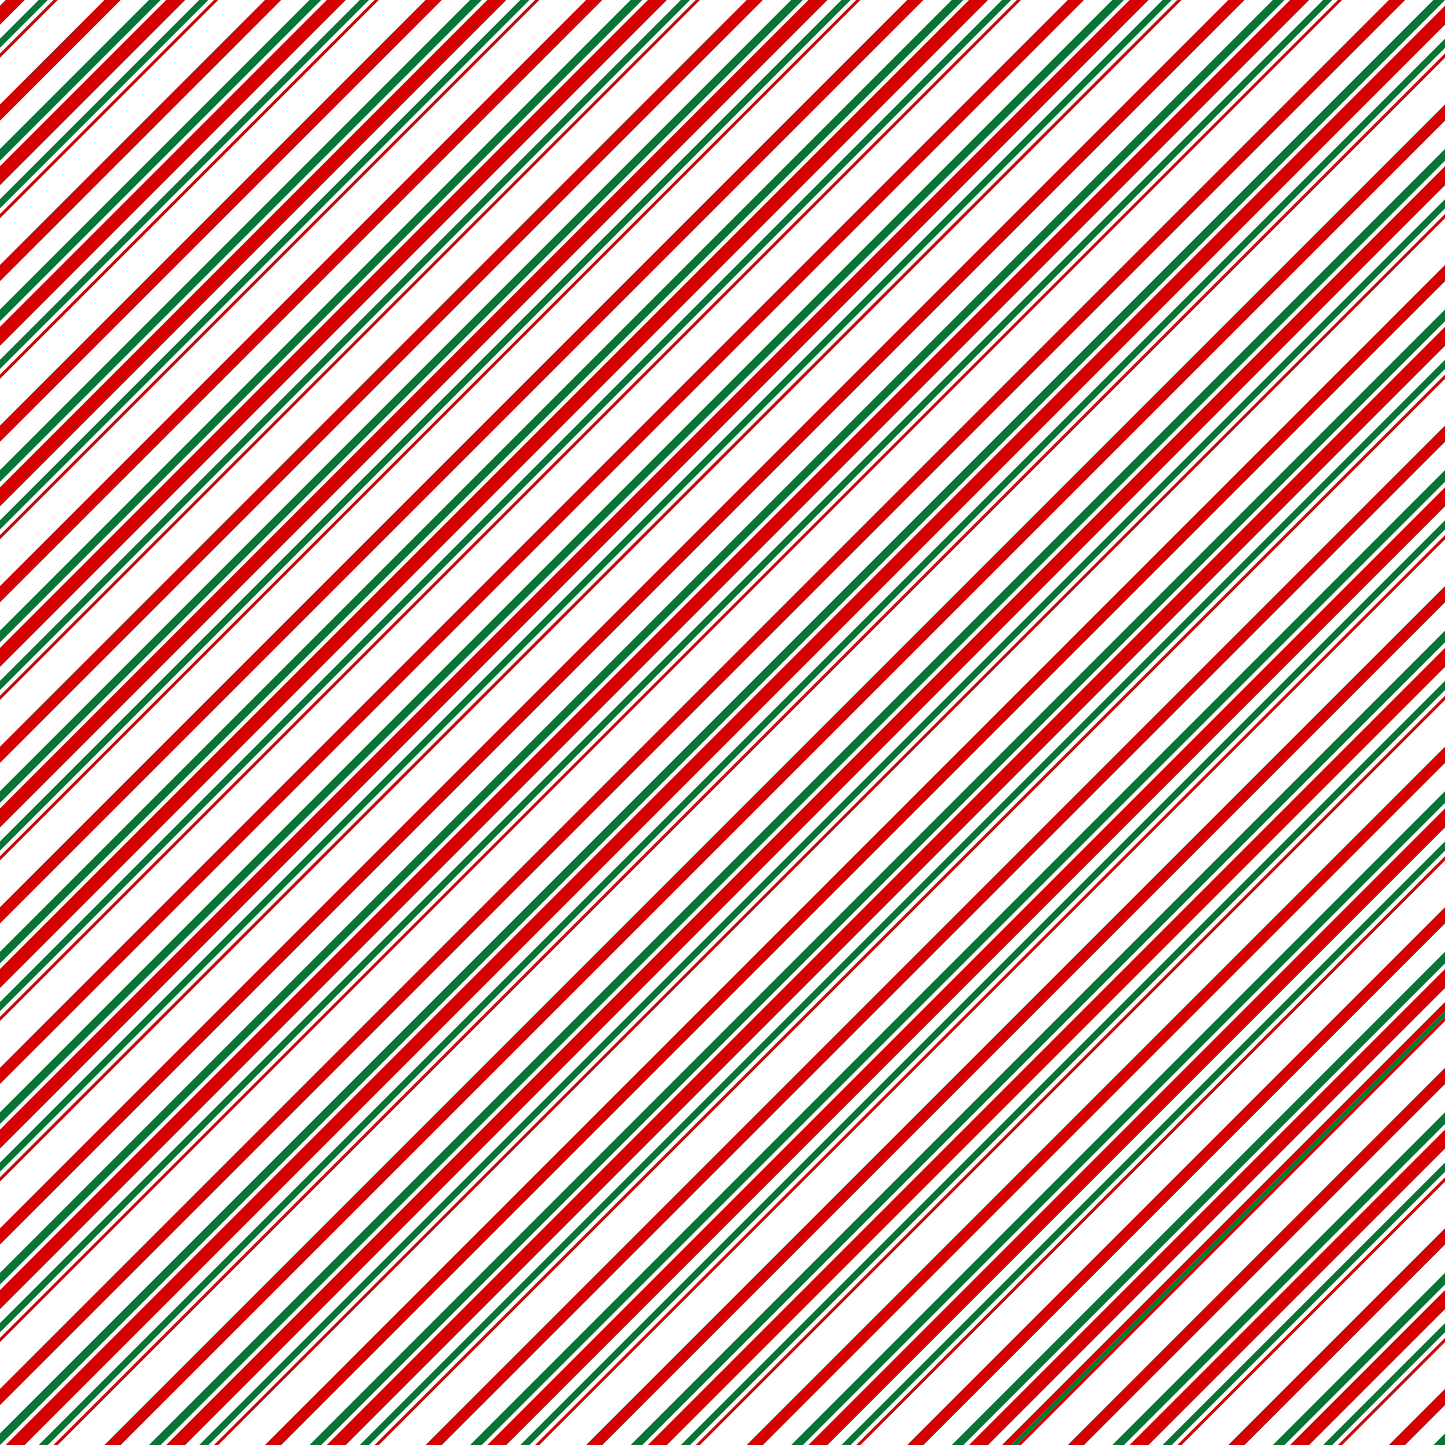 Candy Cane Stripes - Red and Green Stripes 014